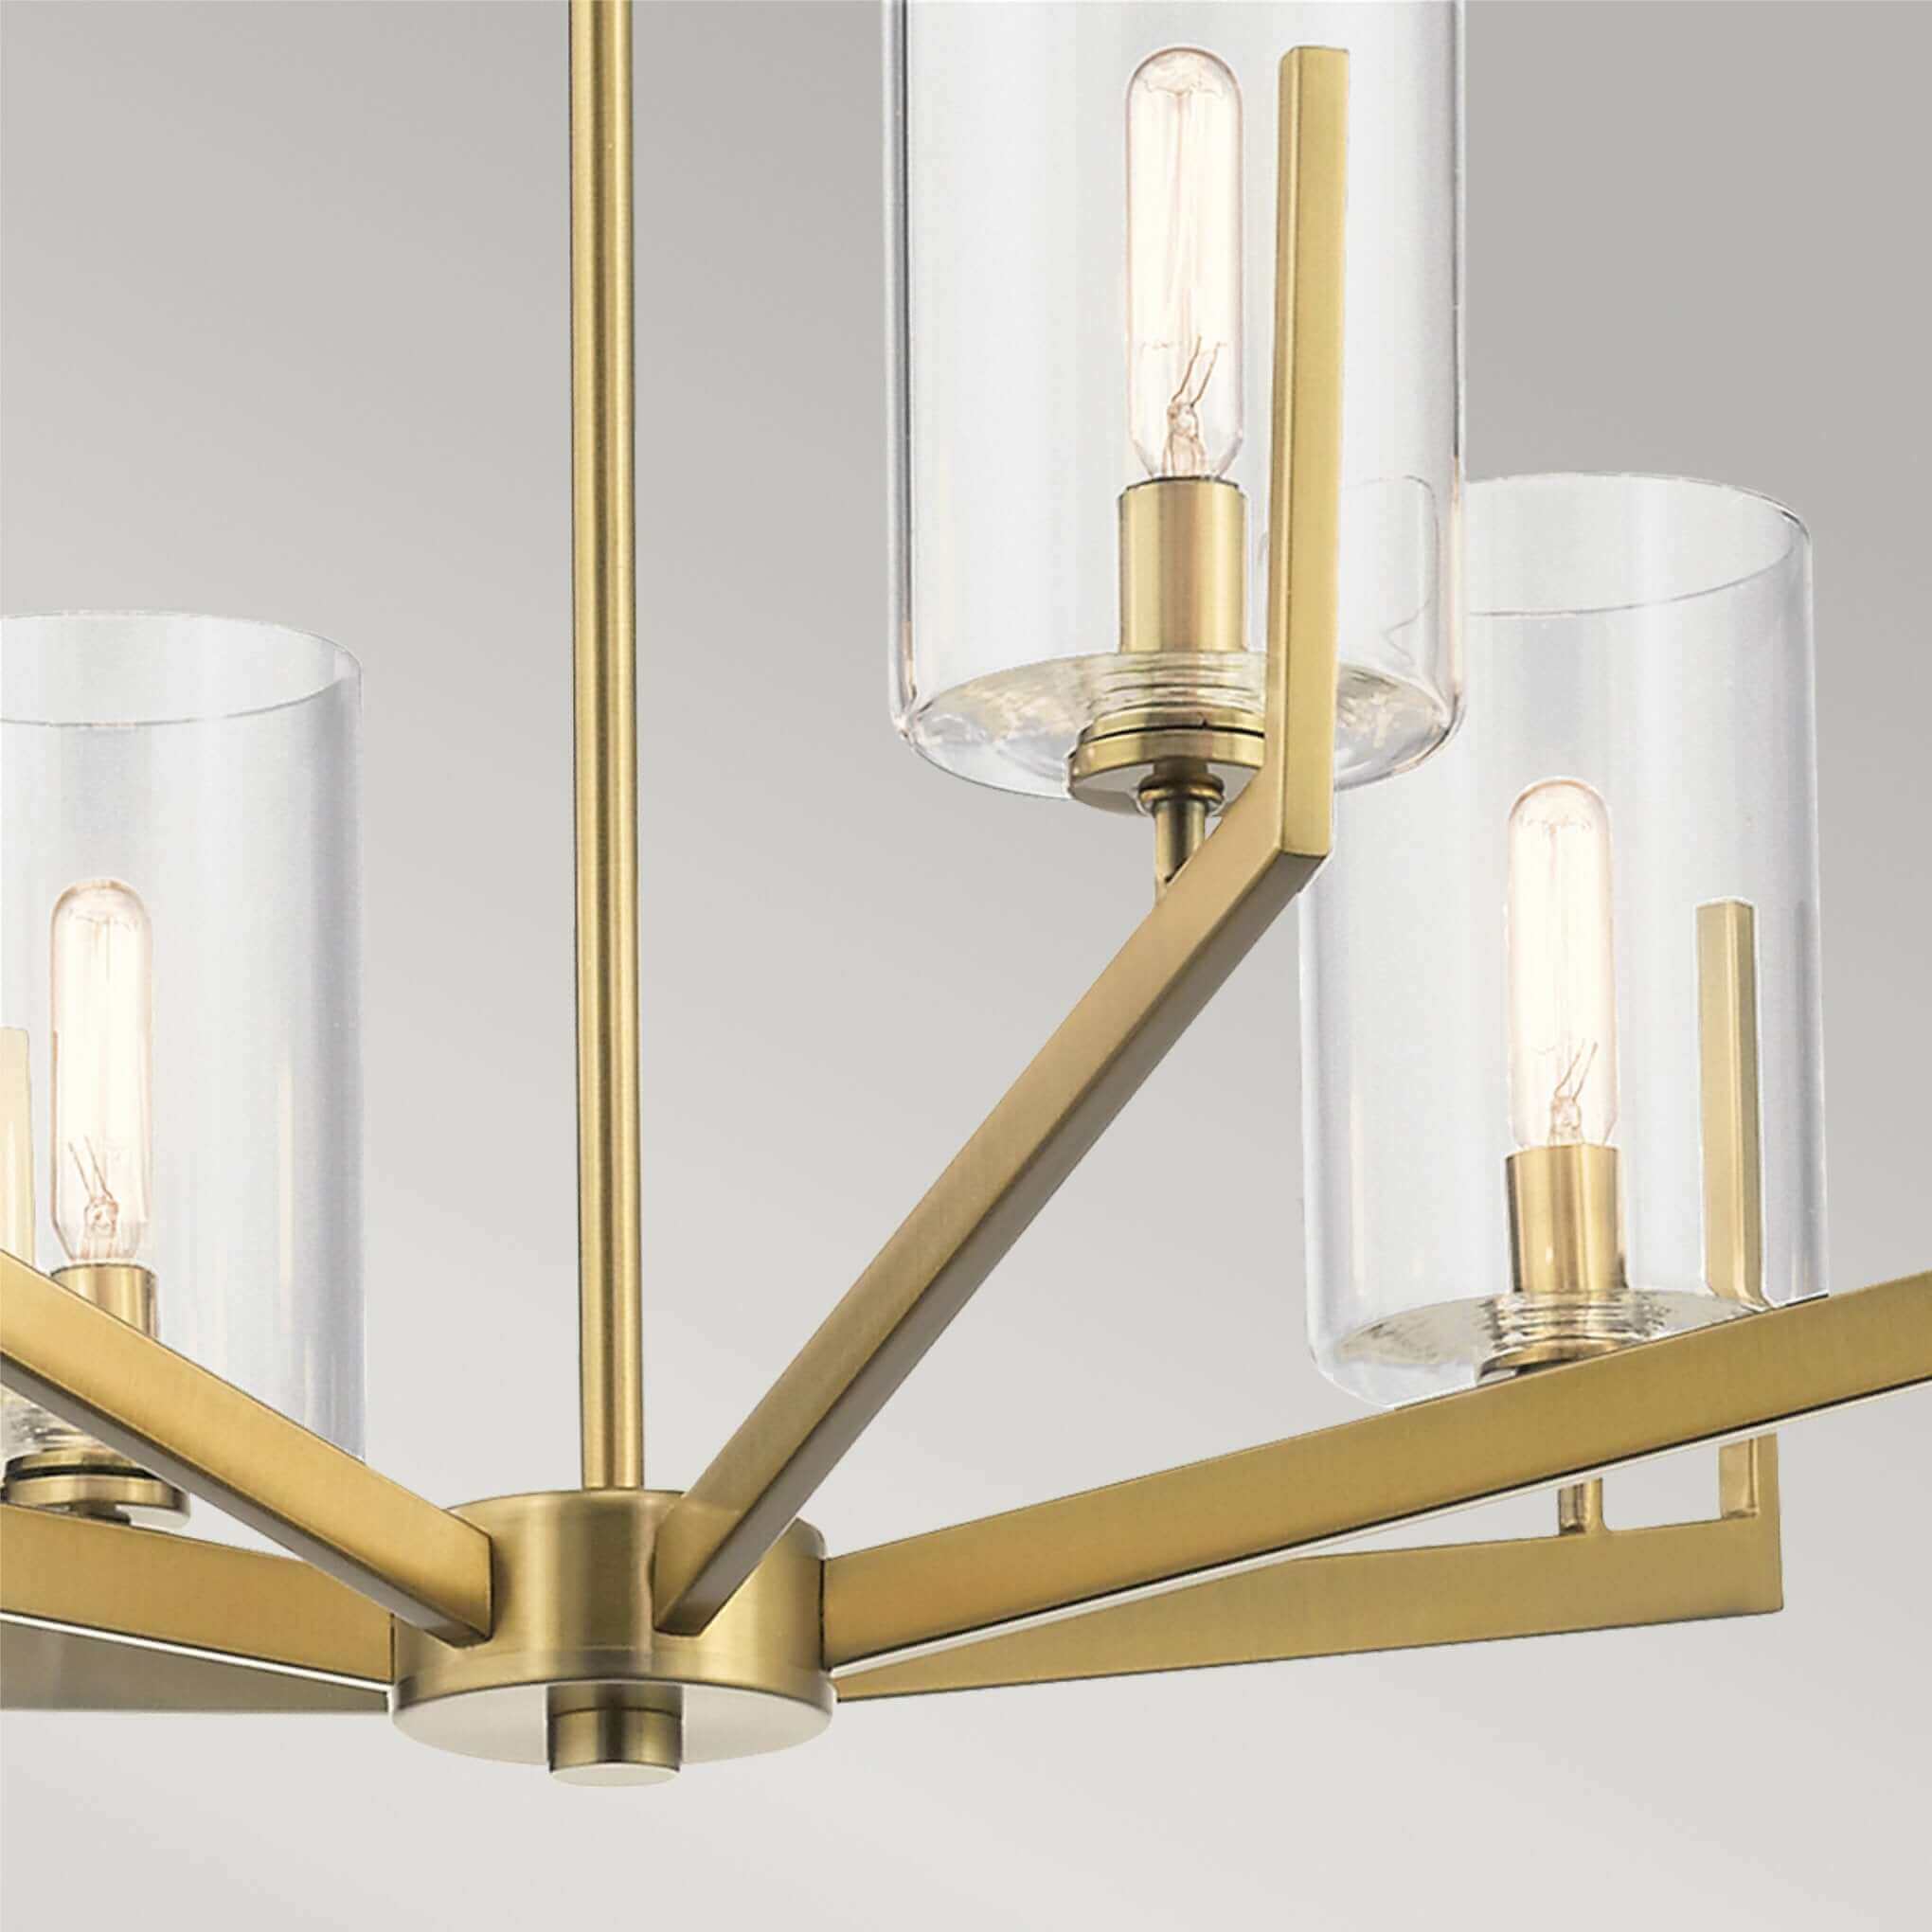 Canne 6-Light Chandelier - Brushed Brass - 71cm - escapologyhome.co.uk